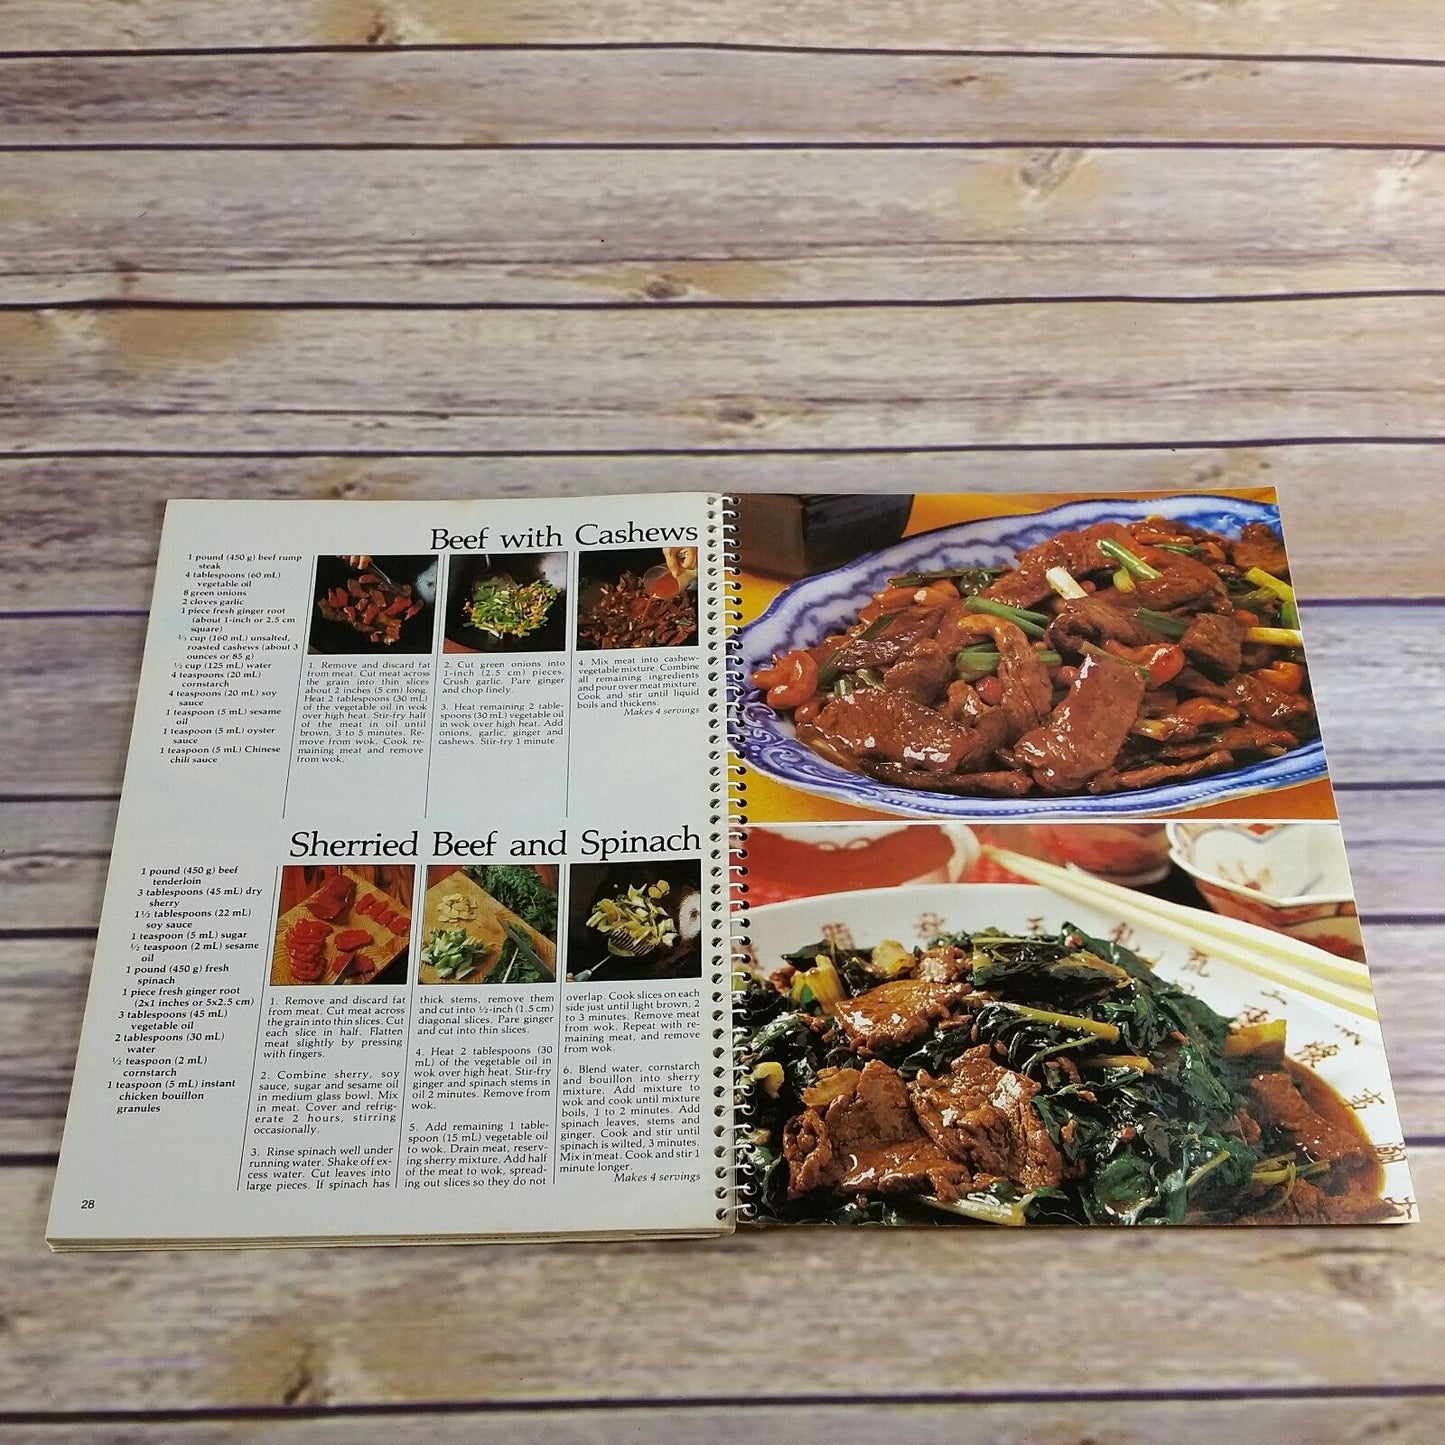 Vintage Cookbook Chinese Cooking Class Consumer Guide 1980 Spiral Bound Paperback